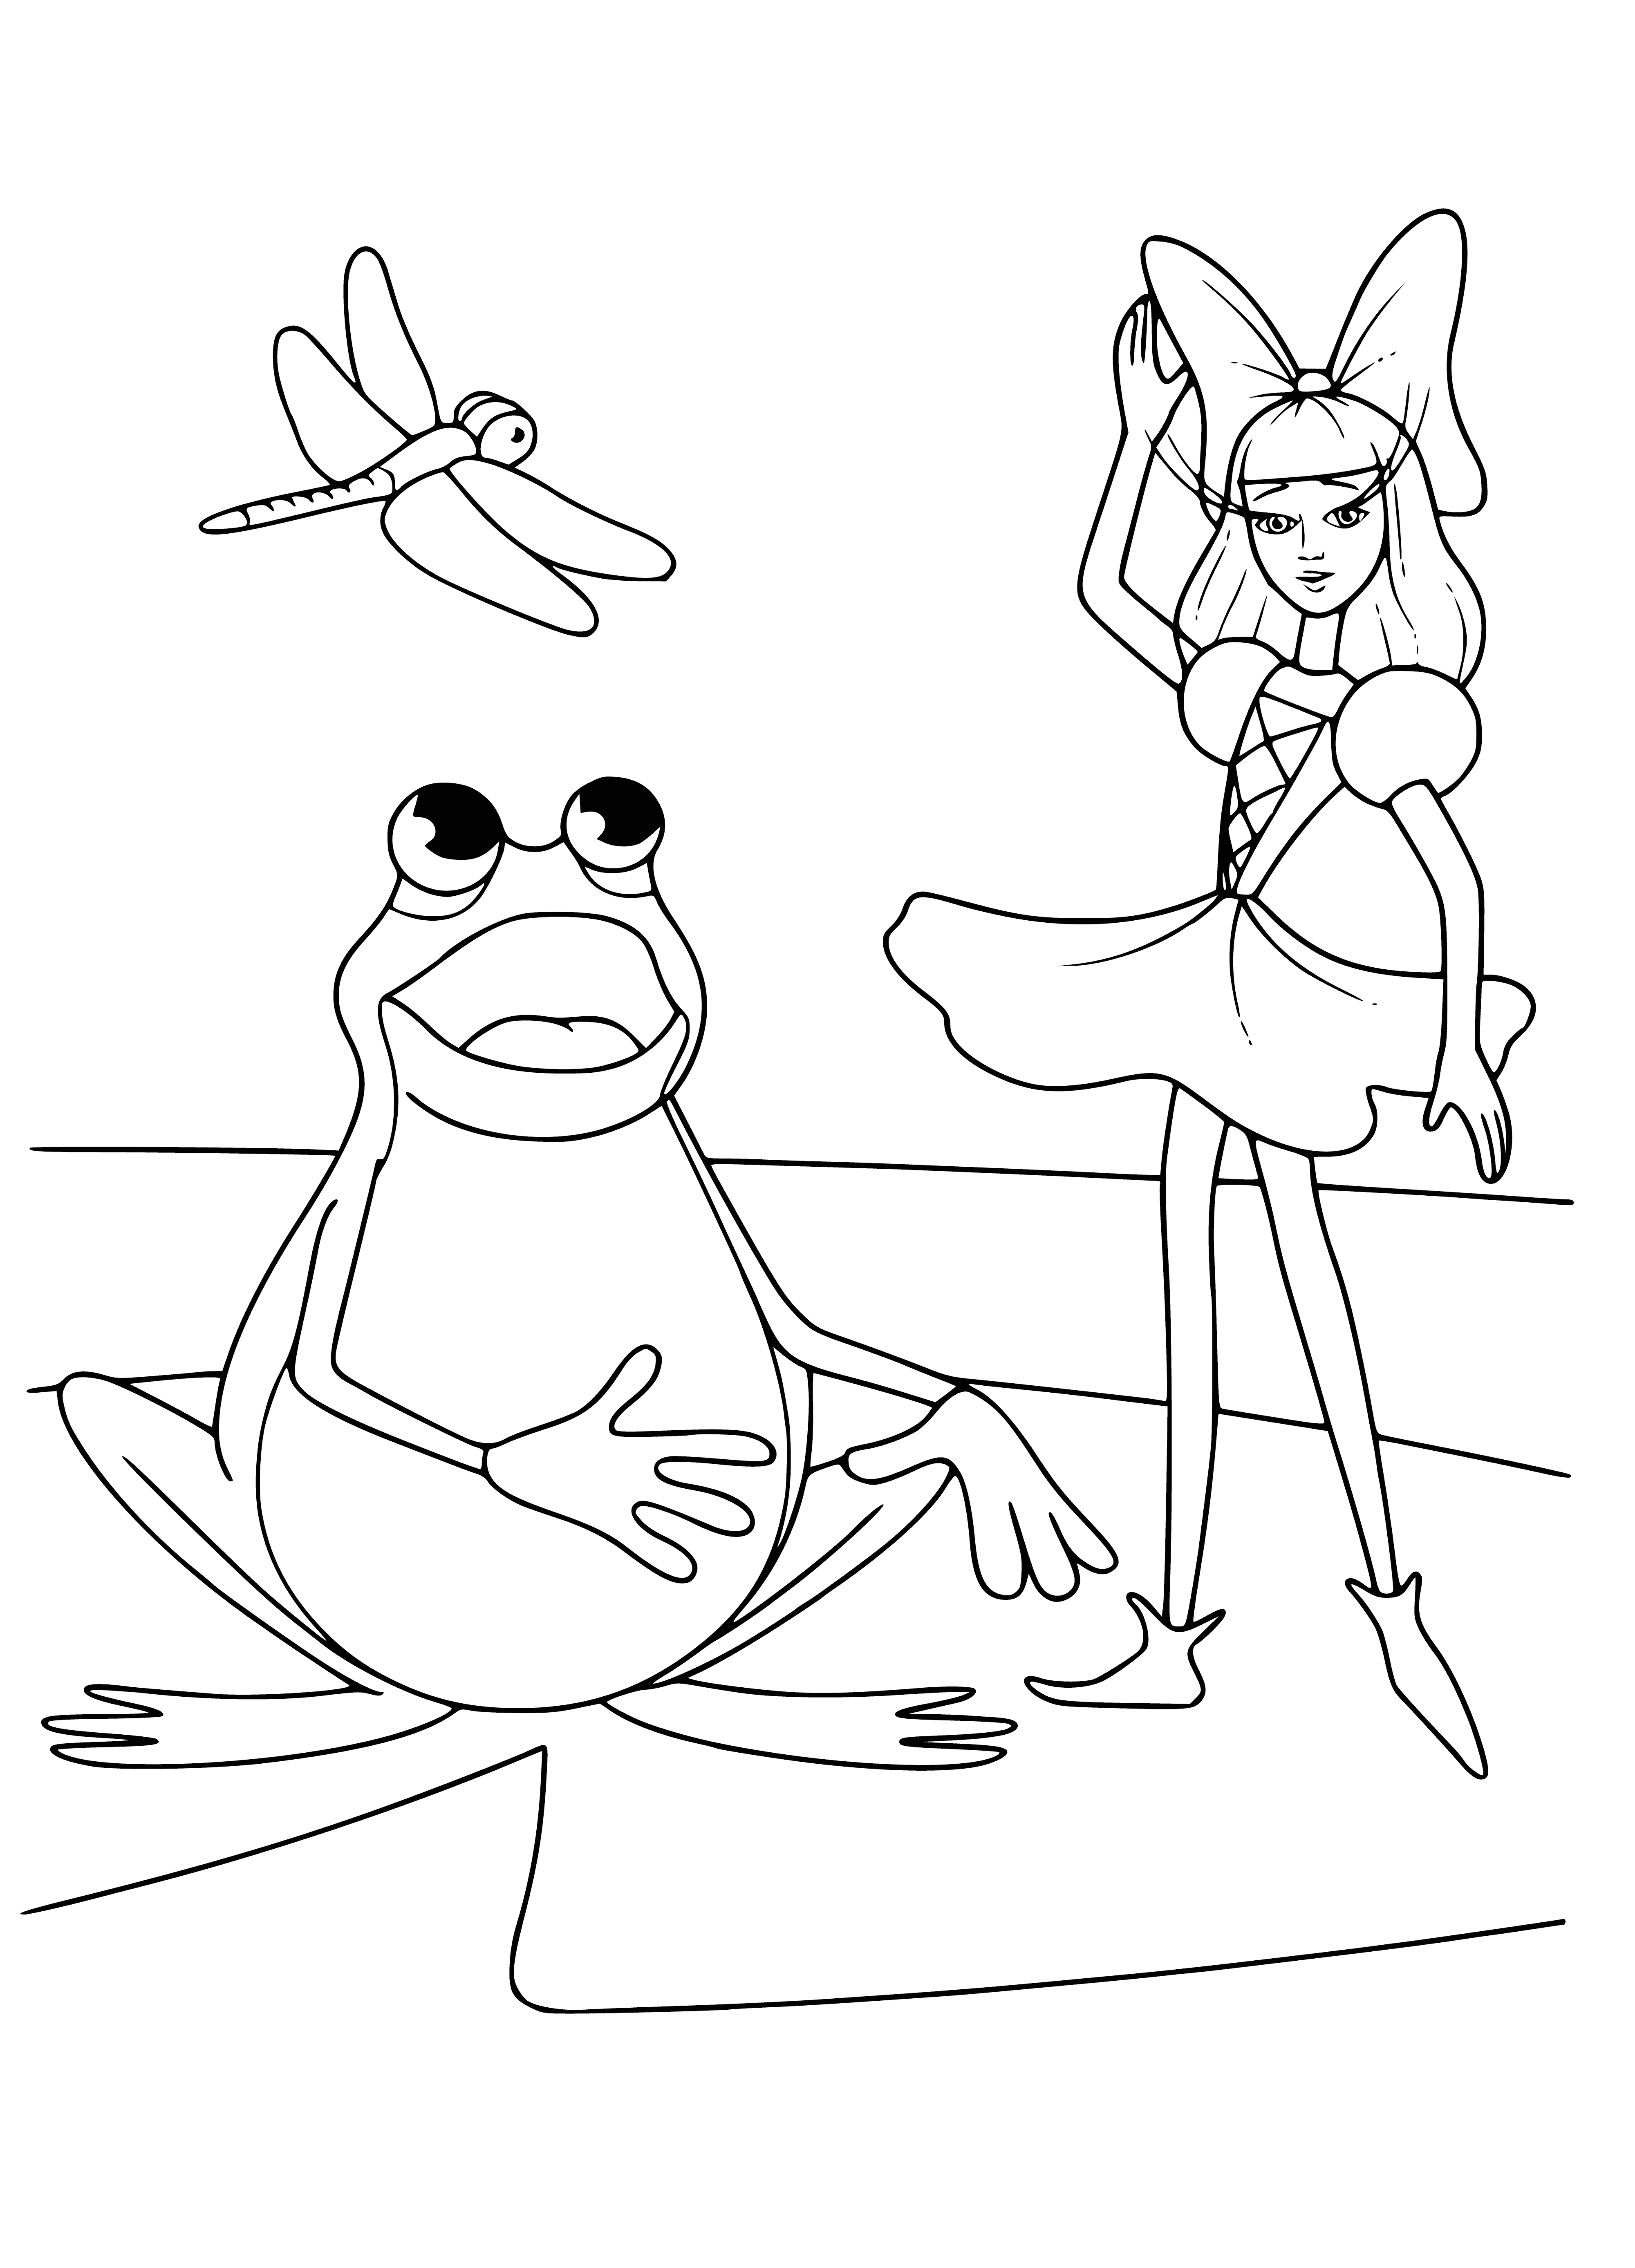 coloring page: She tells the fish that she is so small that no one loves her, and she has no joy in her life.

Thumbelina sits on a toad's son's head, talking to a fish, feeling unloved and joyless.